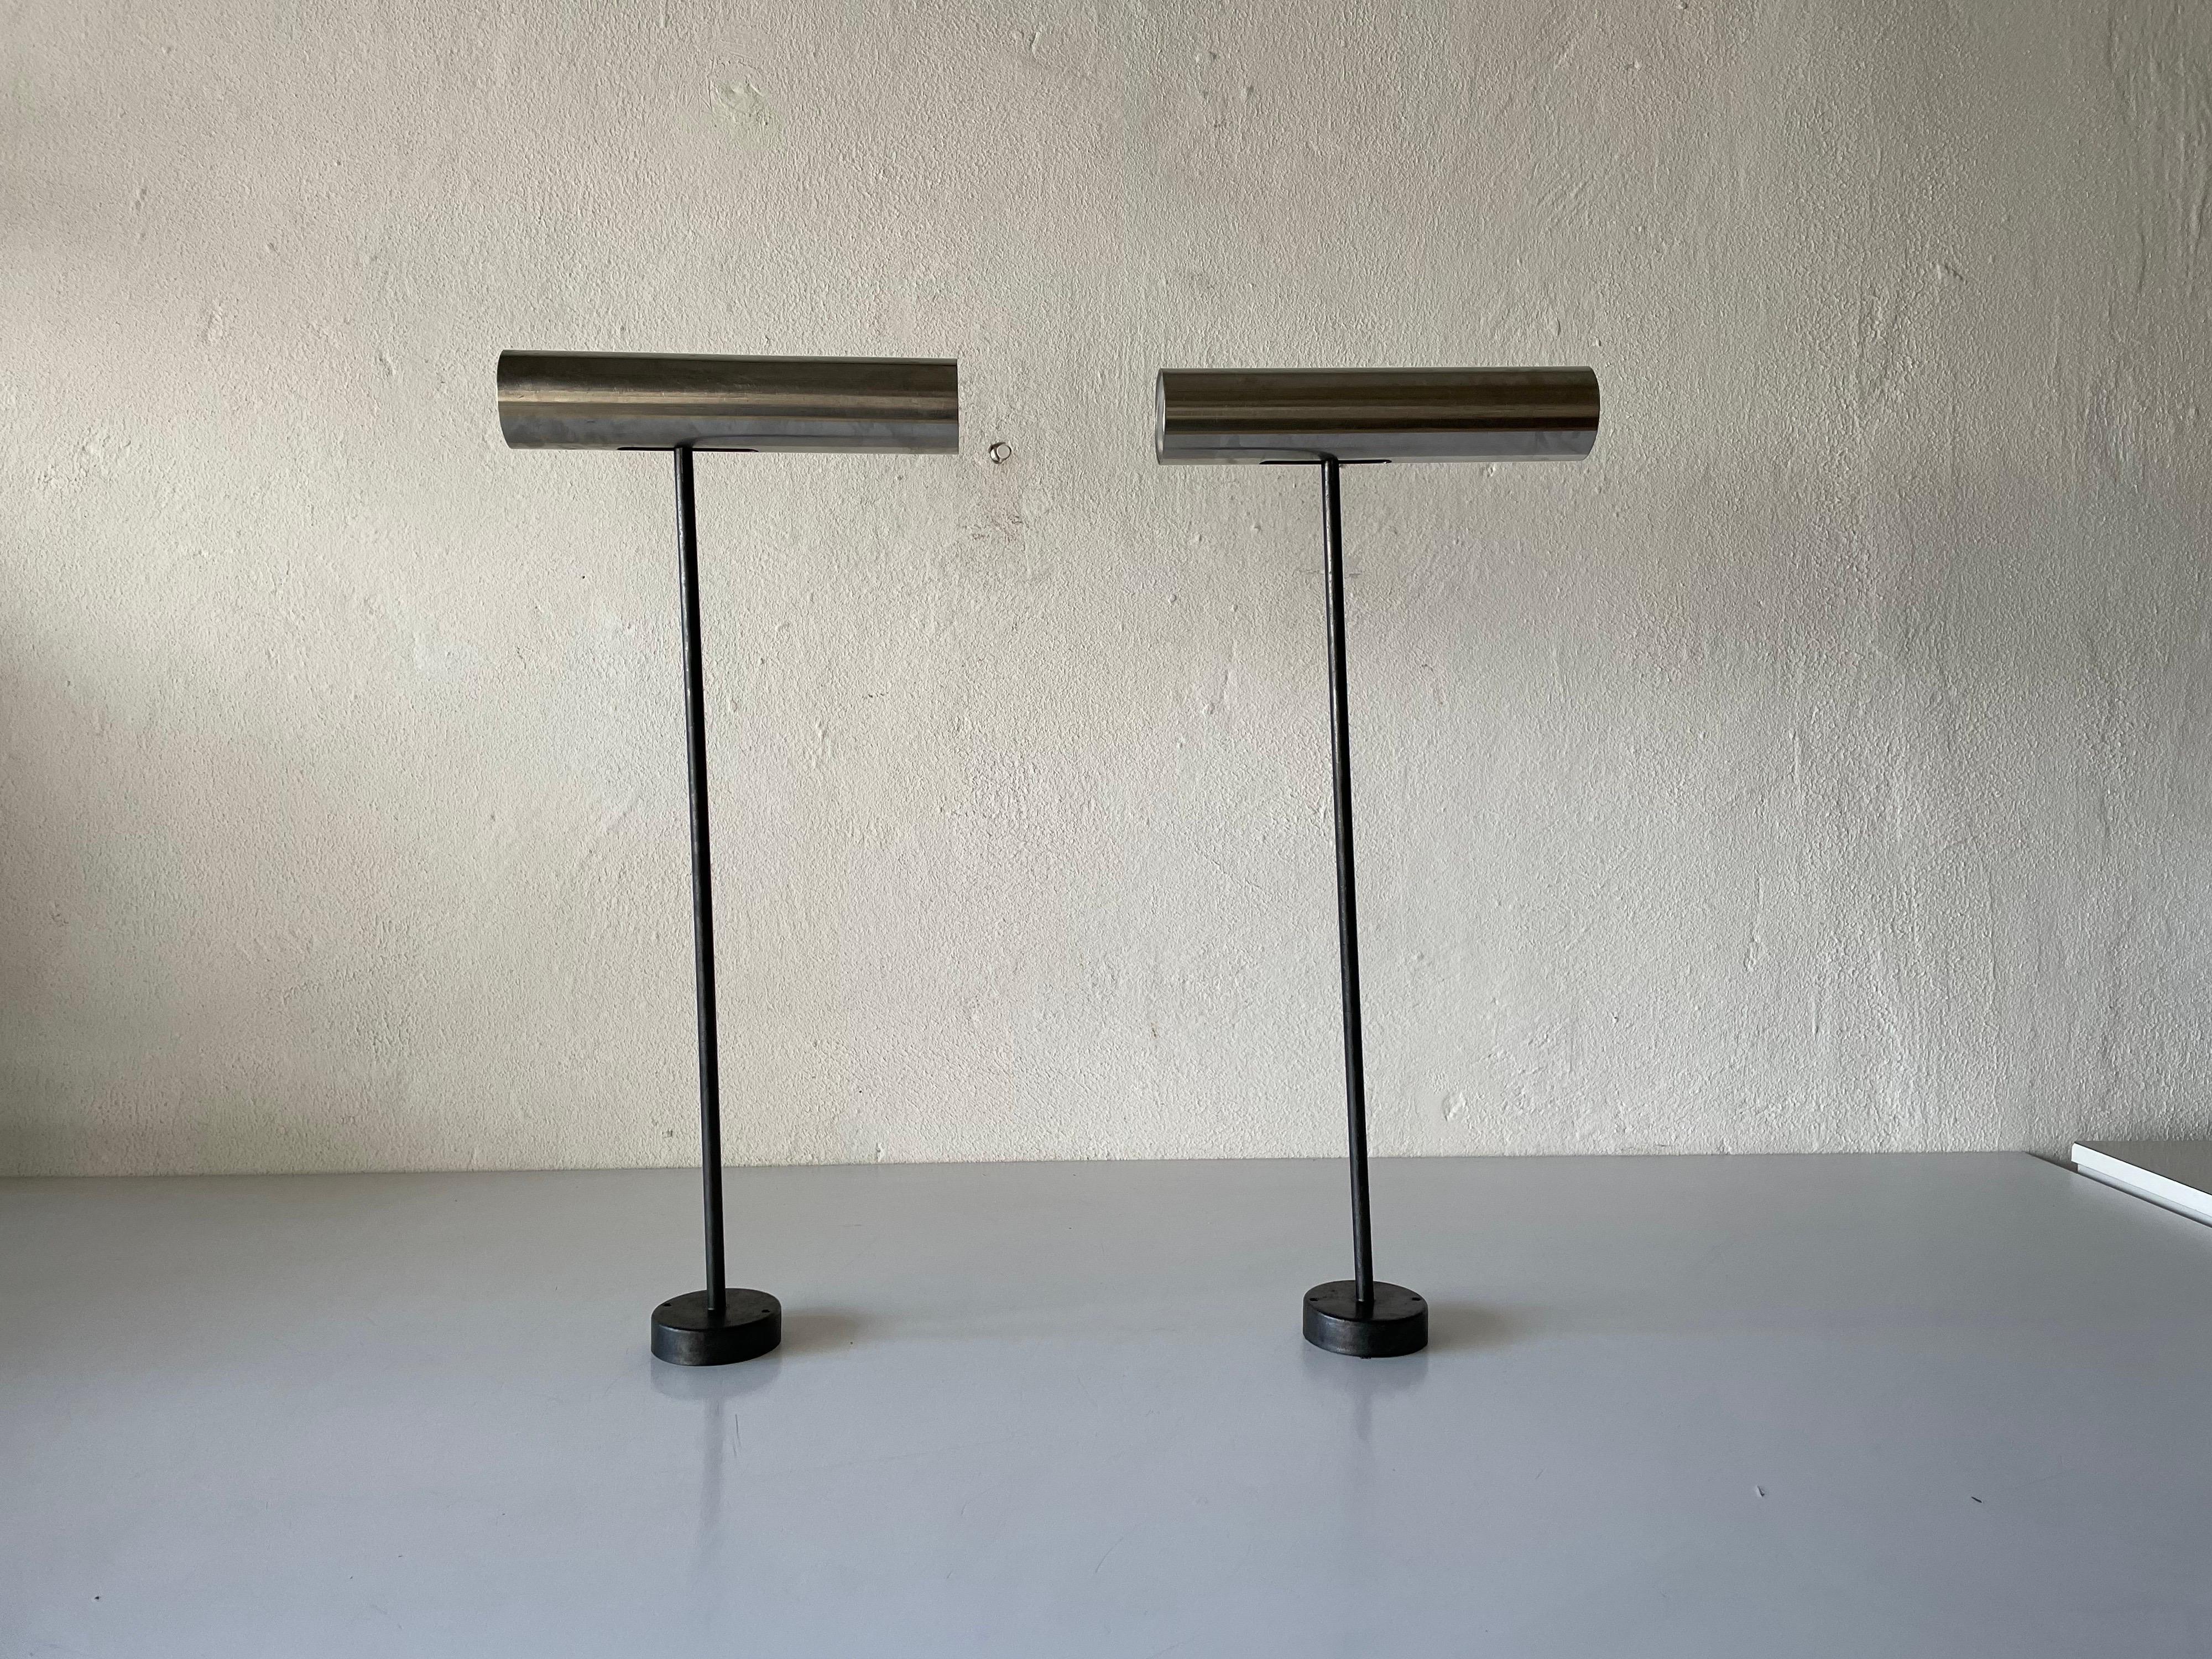 Pair of French ceiling spots or wall lamps, 1950s, France

Very elegant and Minimalist sconces
Adjustable lampshades
Lampshade is made of chrome
Rod is made of stainless steel

Lamps are in very good condition.

These lamps works with E27